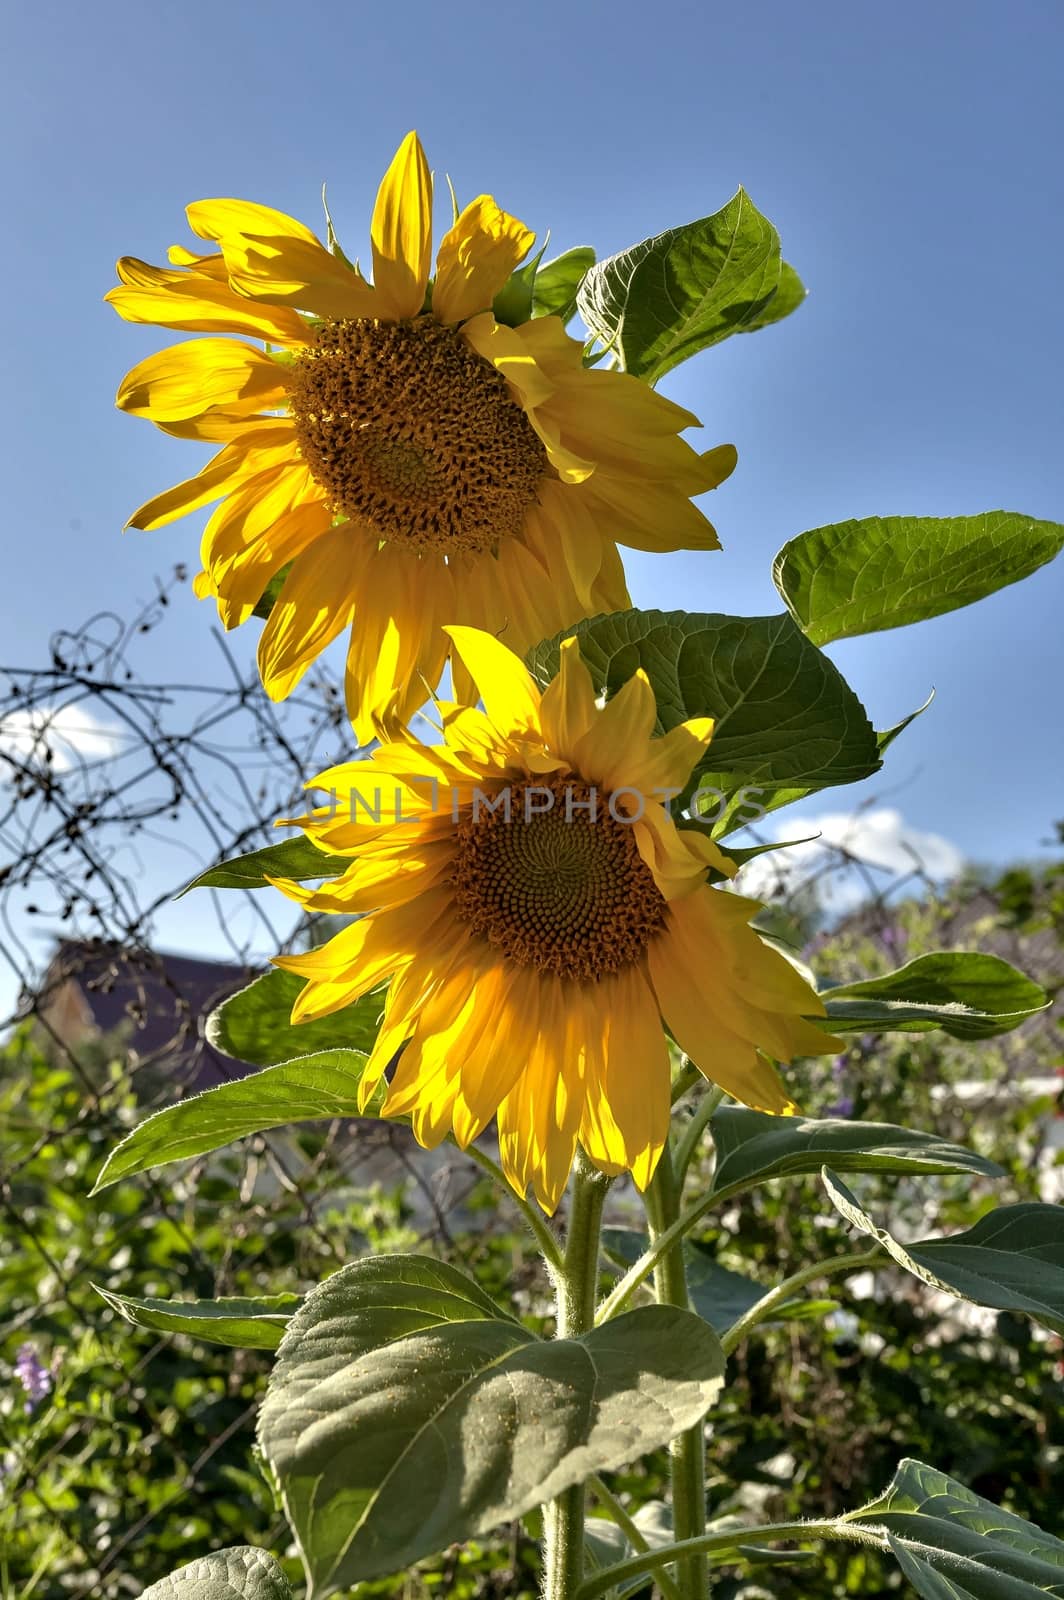 yellow sunflowers illuminated by the sun against the blue sky